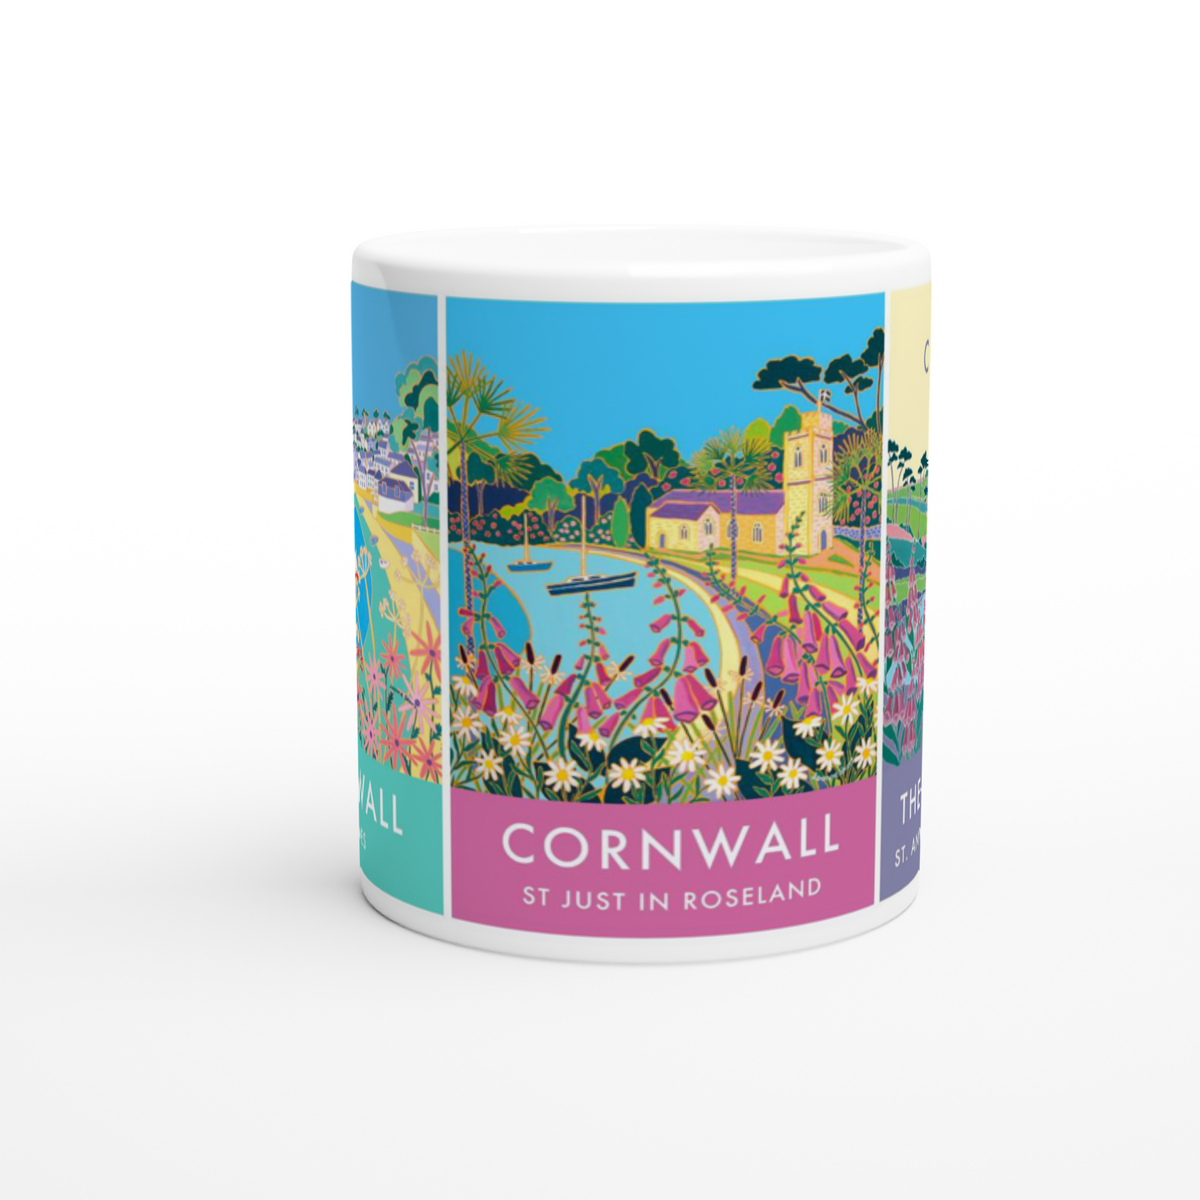 Joanne Short Ceramic Cornish Art Mug featuring the Roseland in Cornwall, St Mawes, St Just in Roseland and St Anthony&#39;s Lighthouse